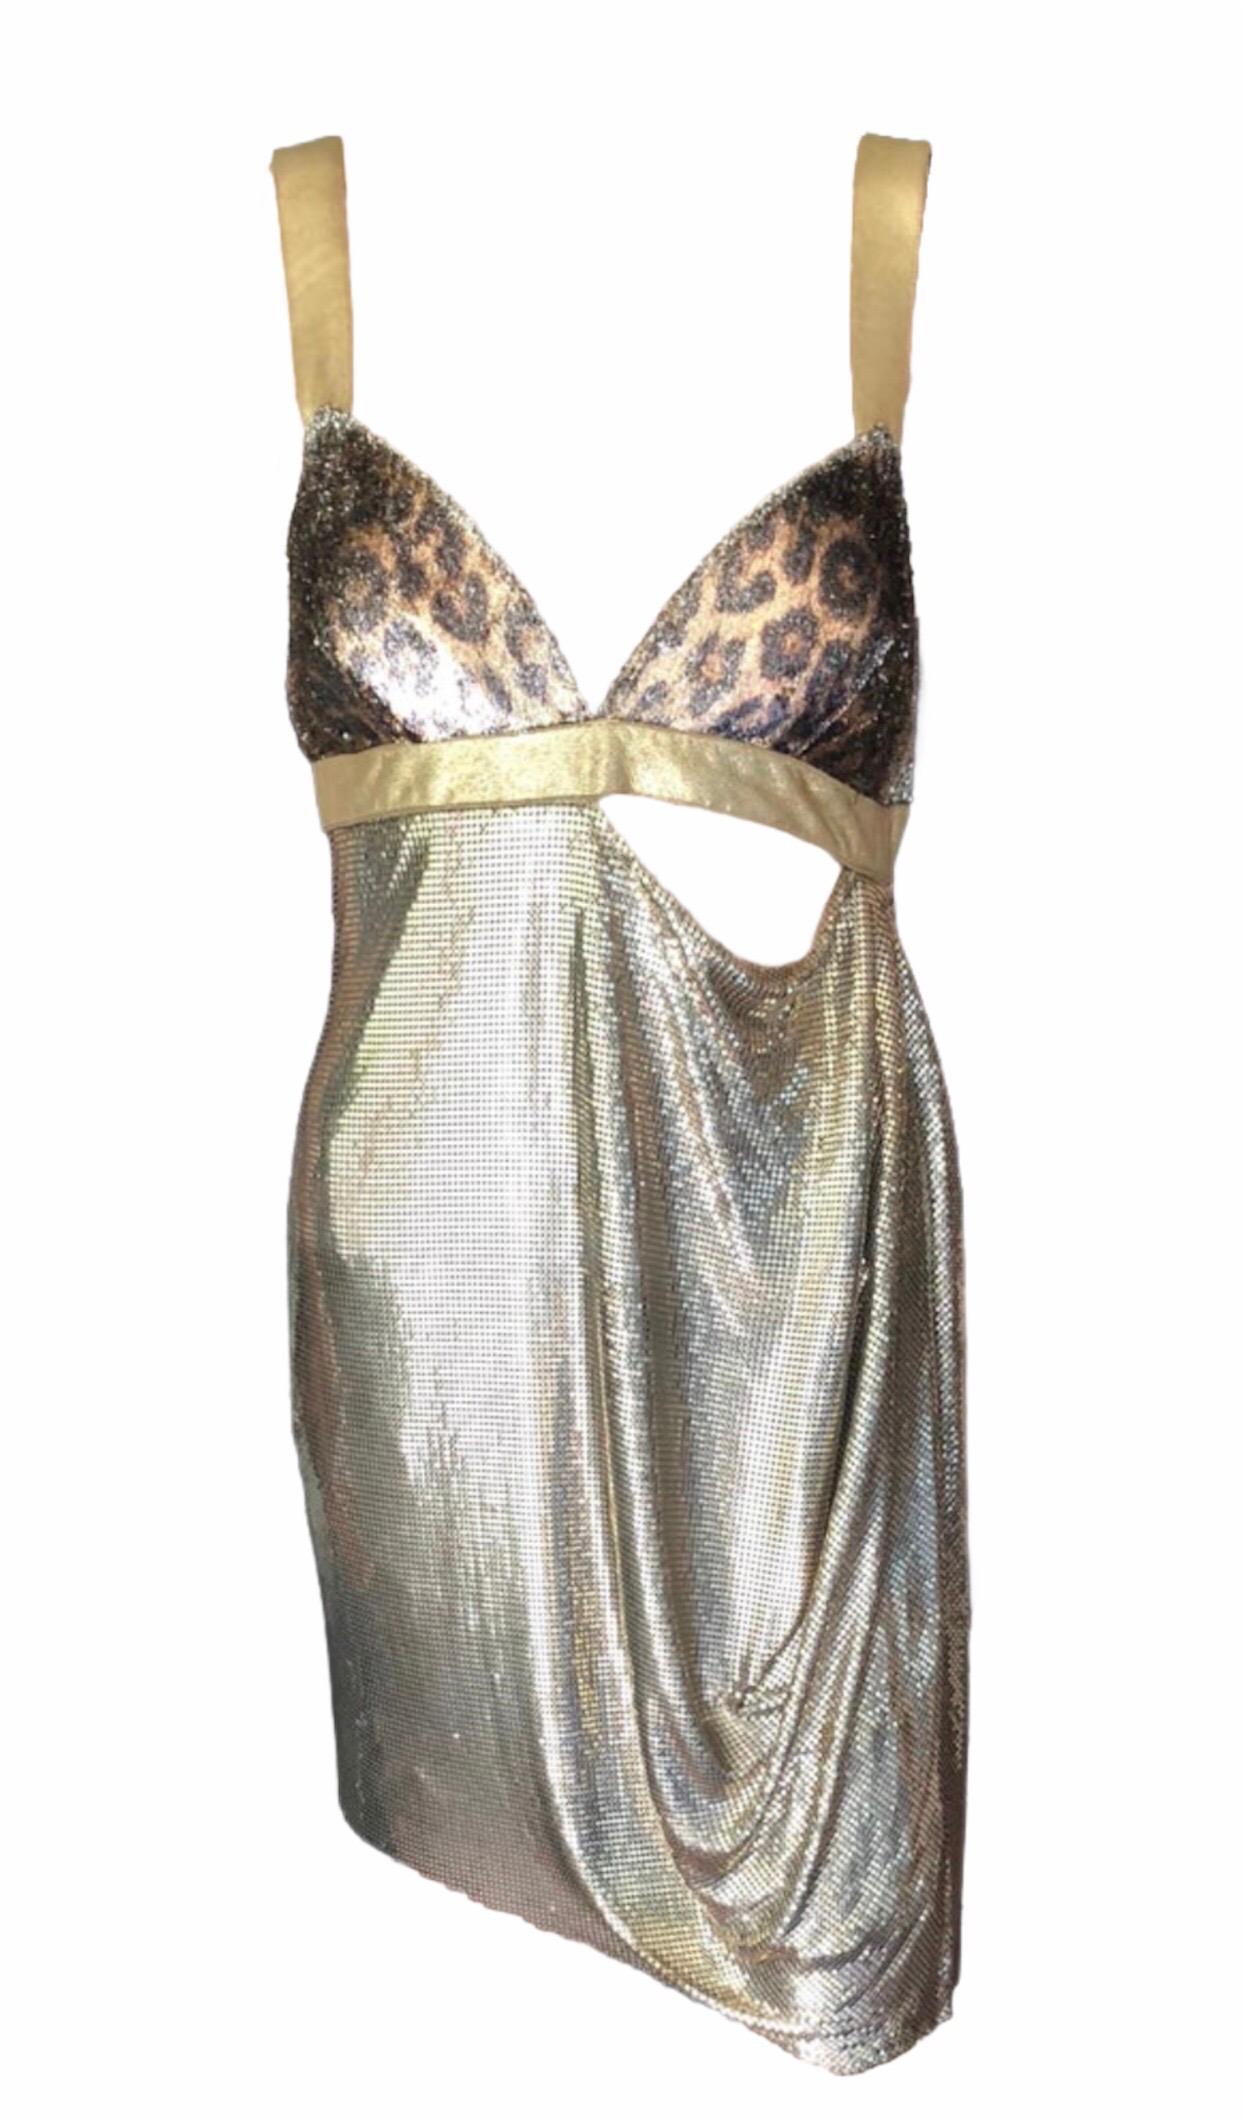 Gianni Versace F/W 1994 Runway Ad Campaign Vintage Gold Oroton Metal Mesh Dress 

COLLECTIBLE ITEM! Gold vintage Gianni Versace metal mesh oroton chainmail mini dress with textured leopard pattern at bust, cutout at waist, draped skirt panel and